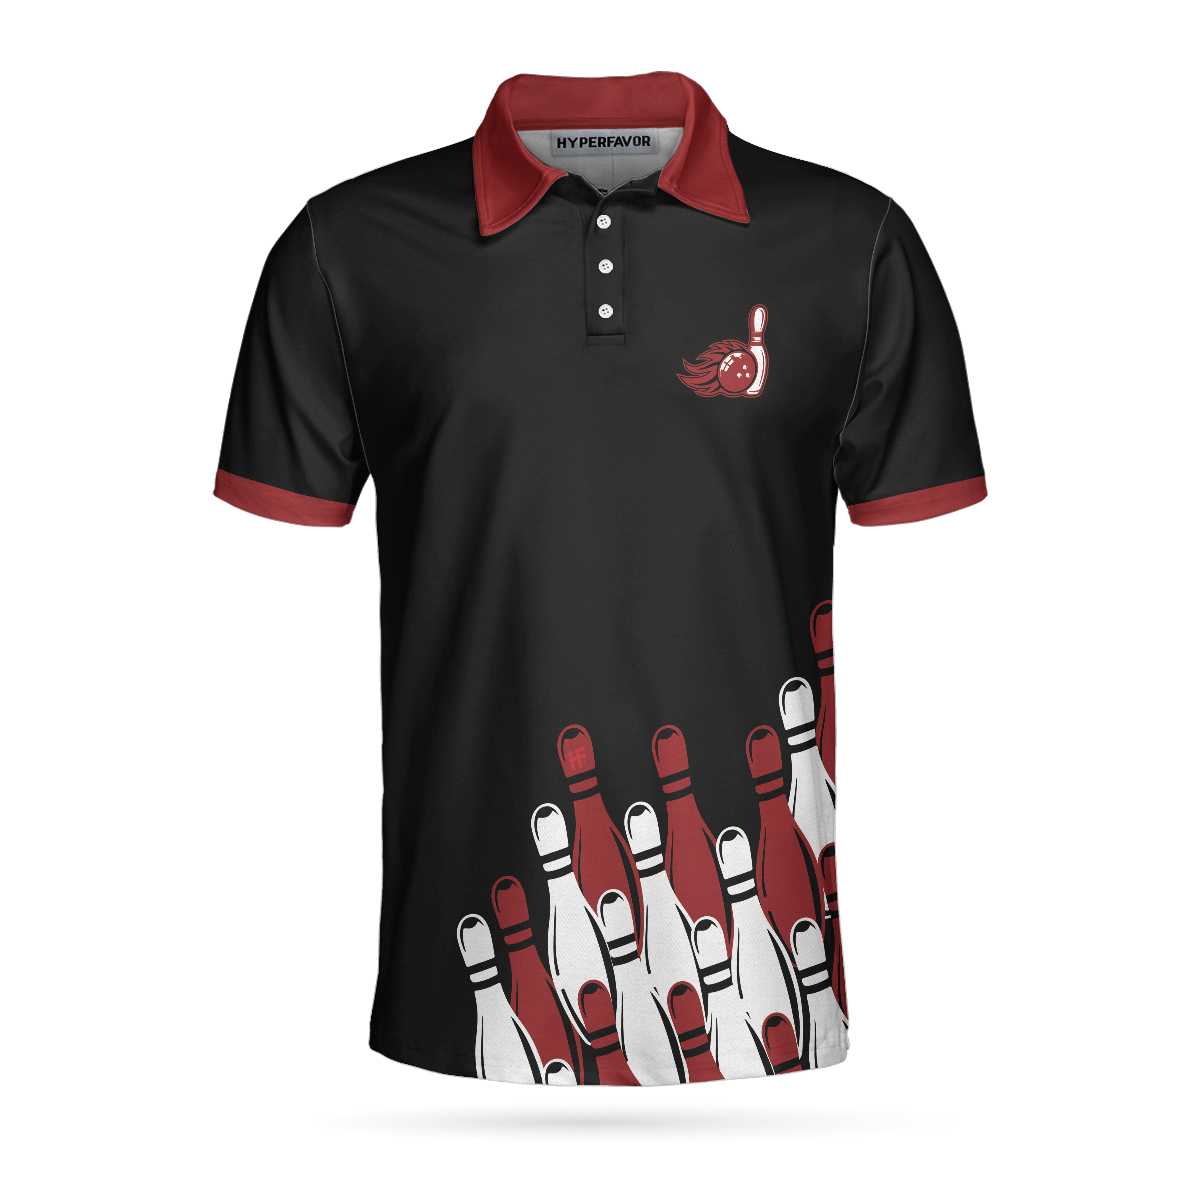 Your Ball Will Be Right Back Polo Shirt/ Tenpin Bowling Shirt For Men With Sayings/ Bowling Gift Idea Coolspod